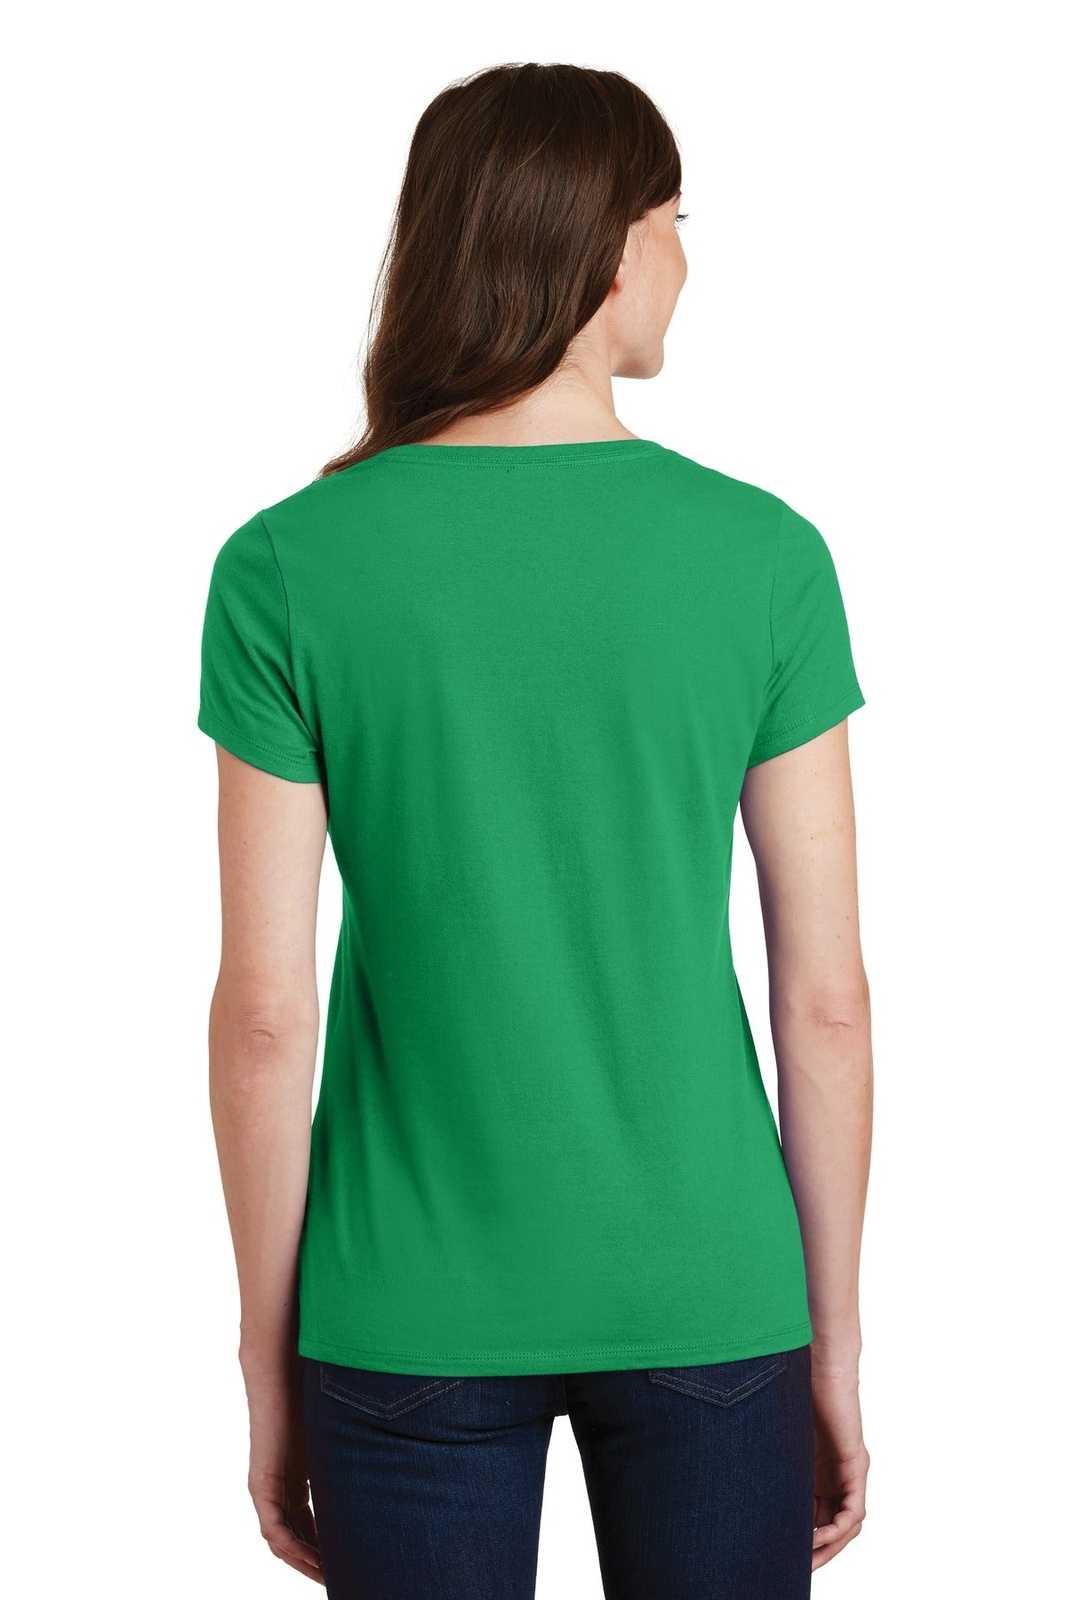 Port &amp; Company LPC450V Ladies Fan Favorite V-Neck Tee - Athletic Kelly - HIT a Double - 2